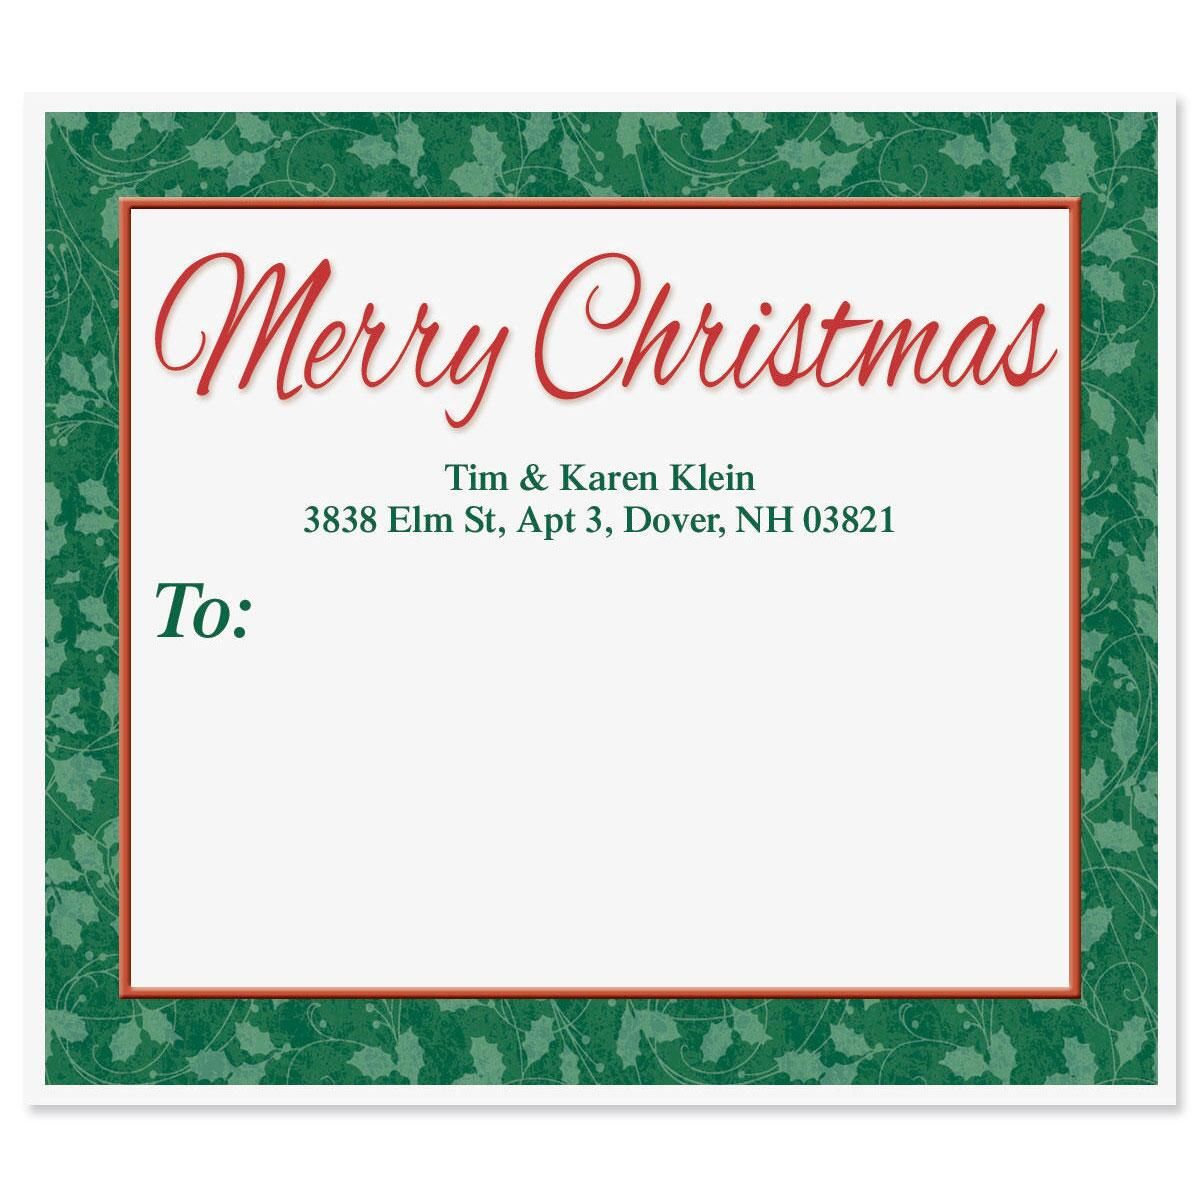 merry-christmas-package-labels-colorful-images